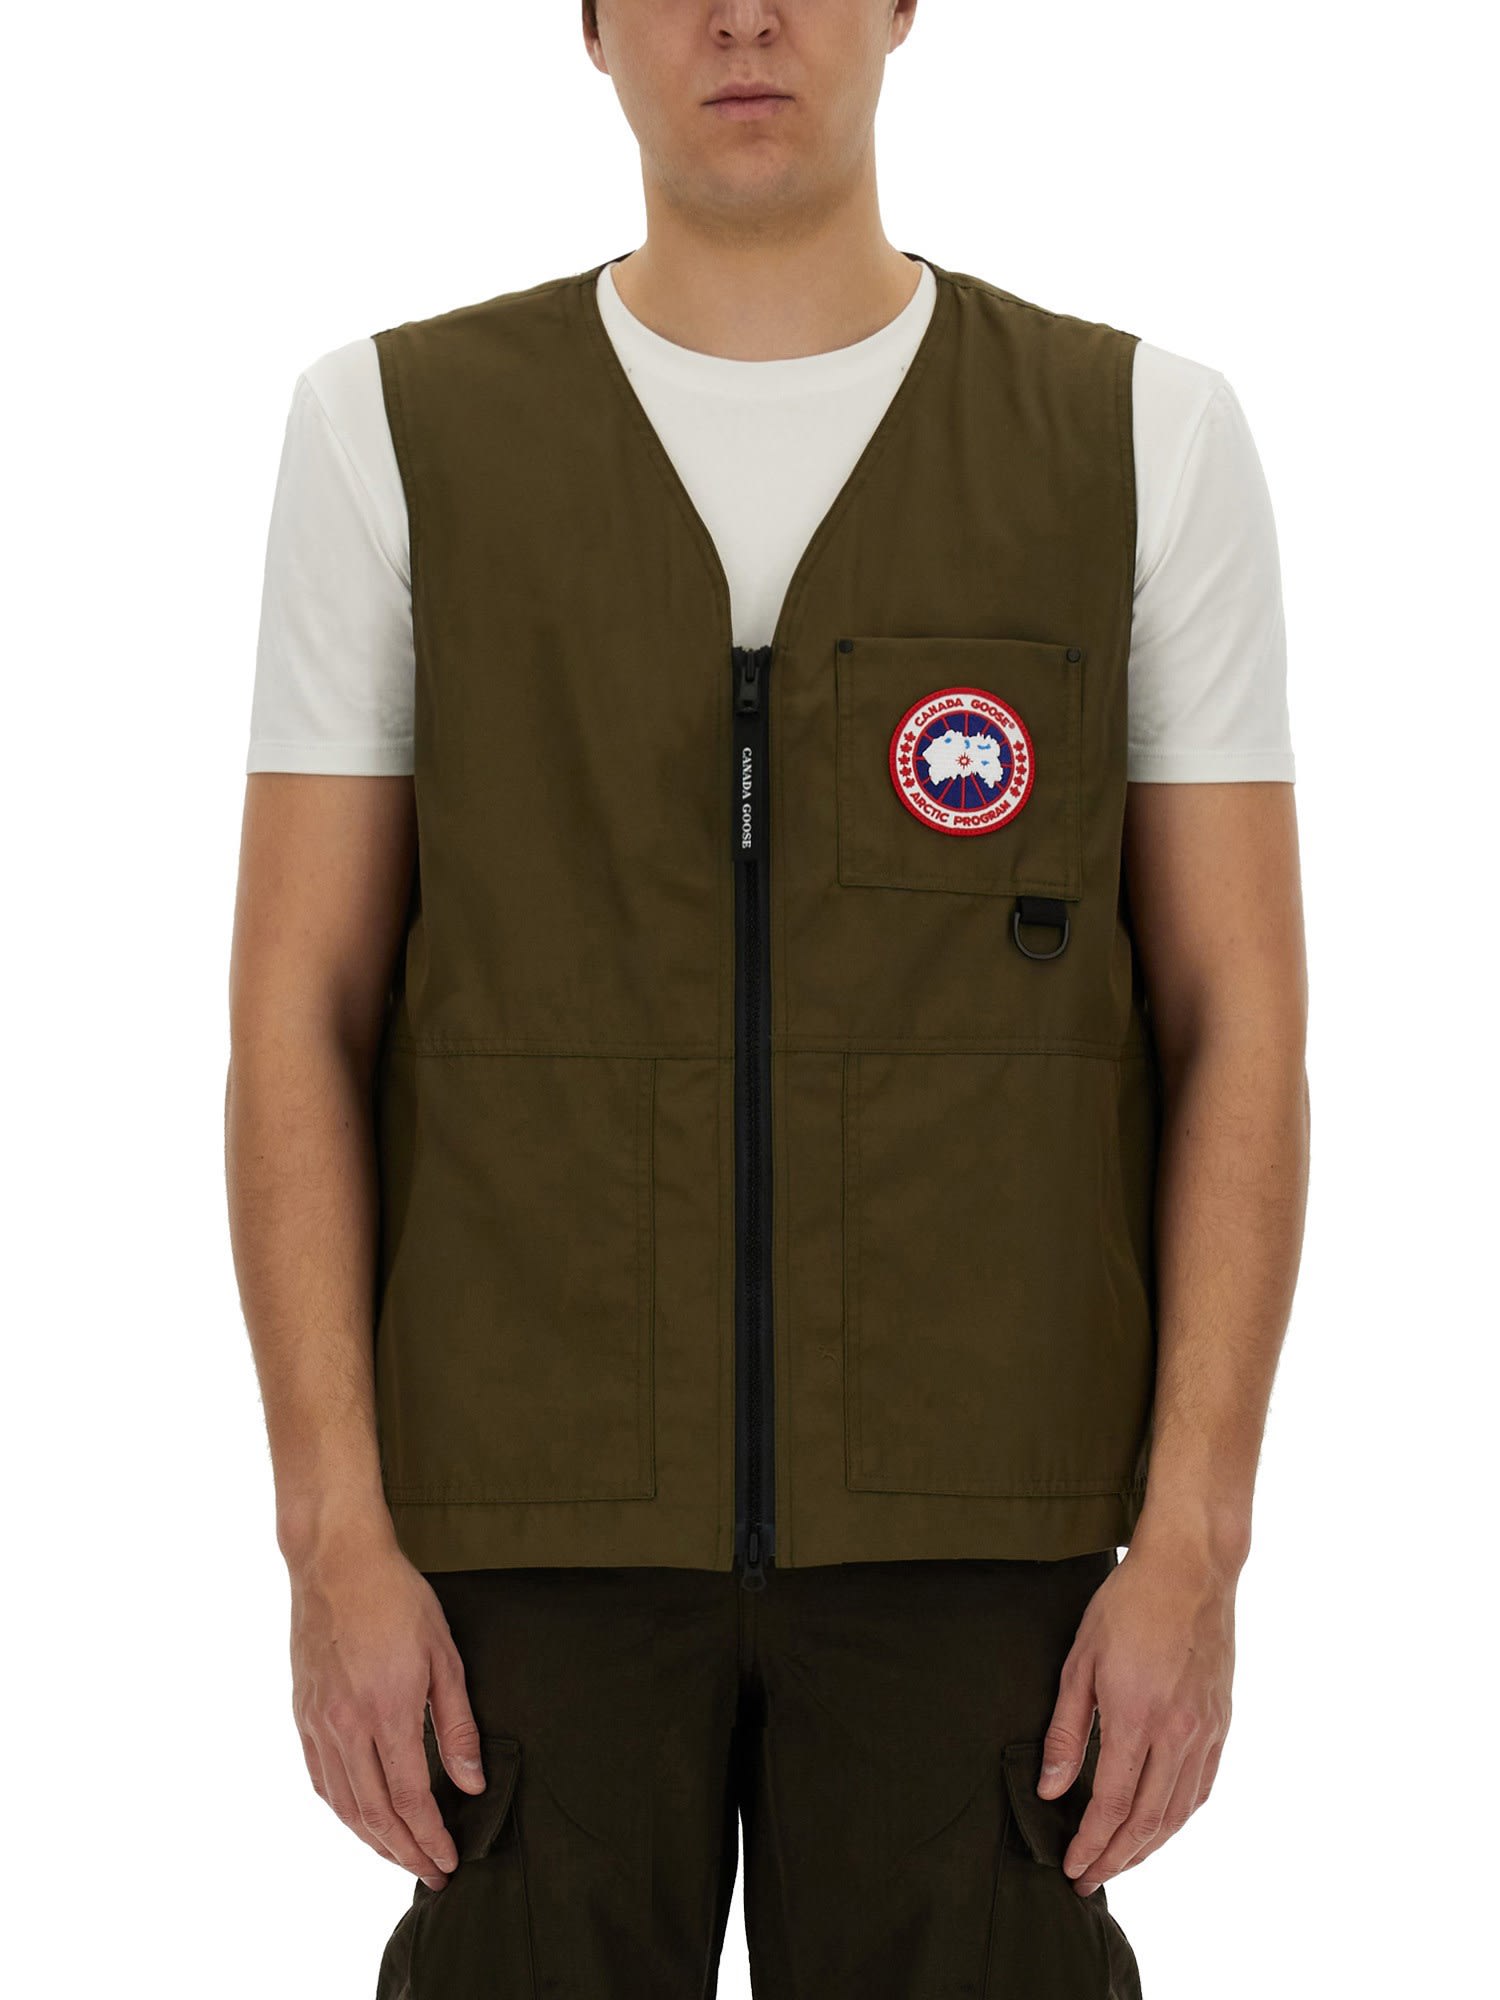 Canada Goose Vests With Logo